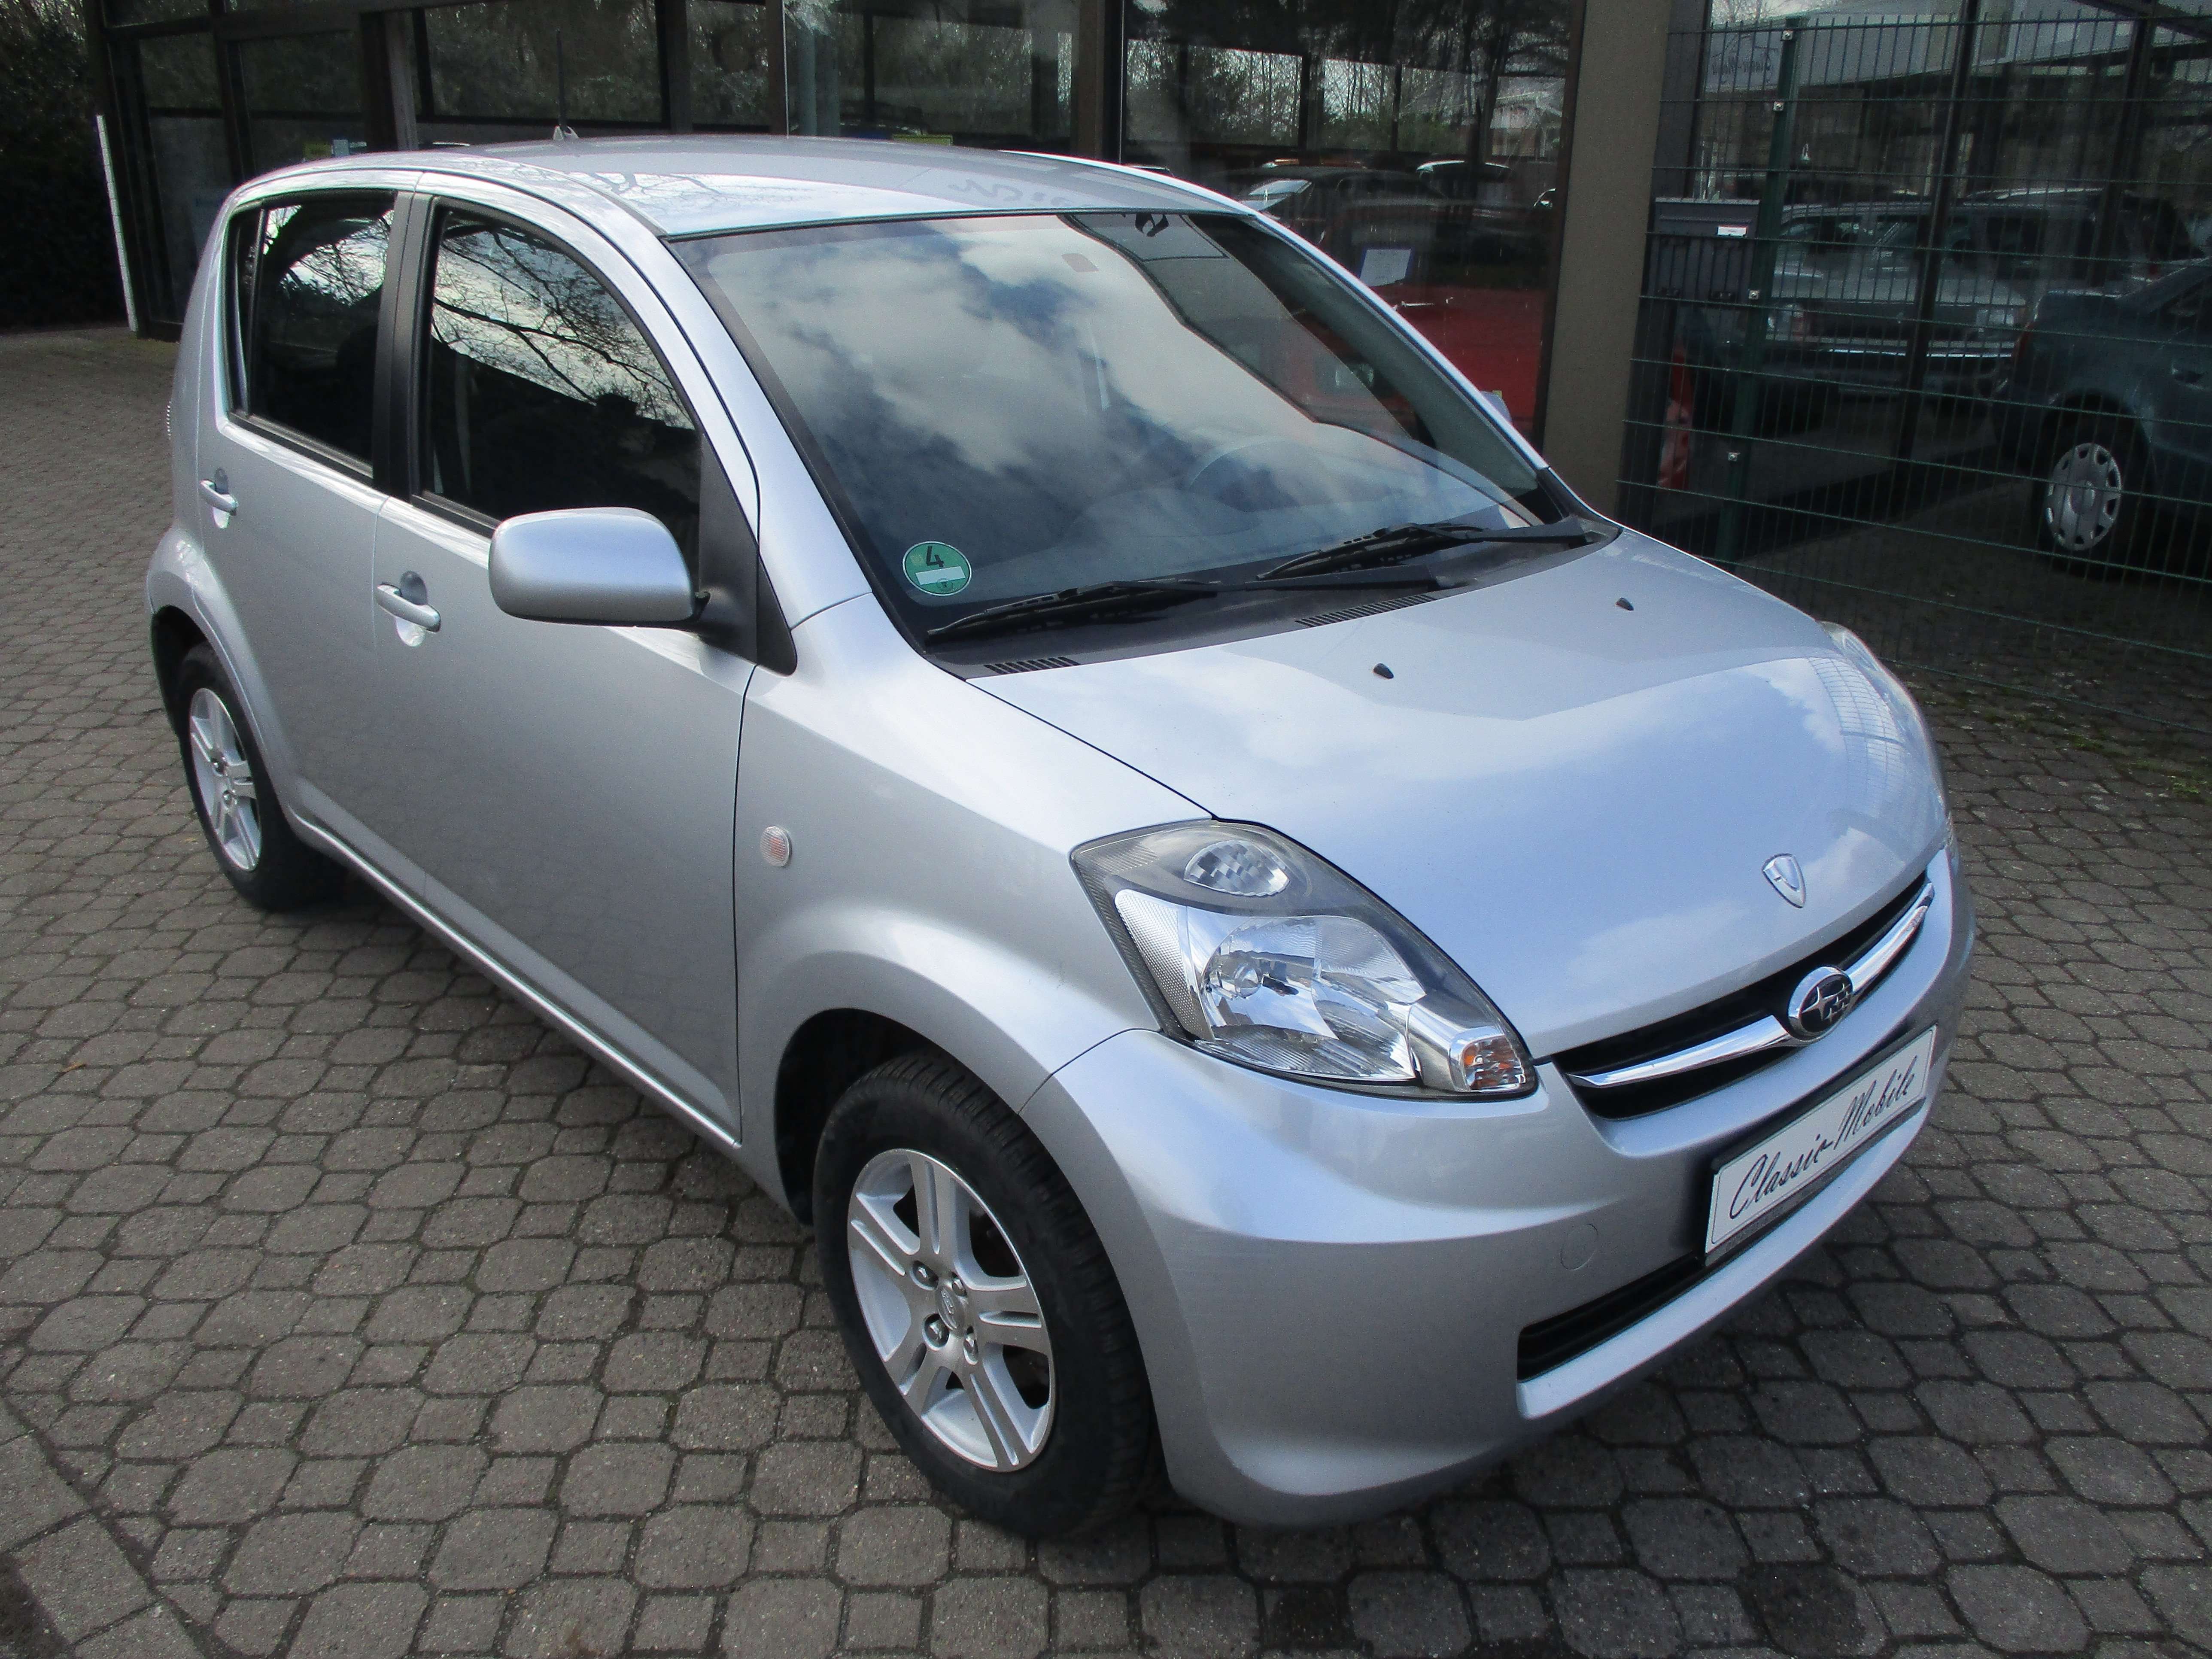 Subaru Justy Compact in Silver used in Beverstedt for € 3,450.-